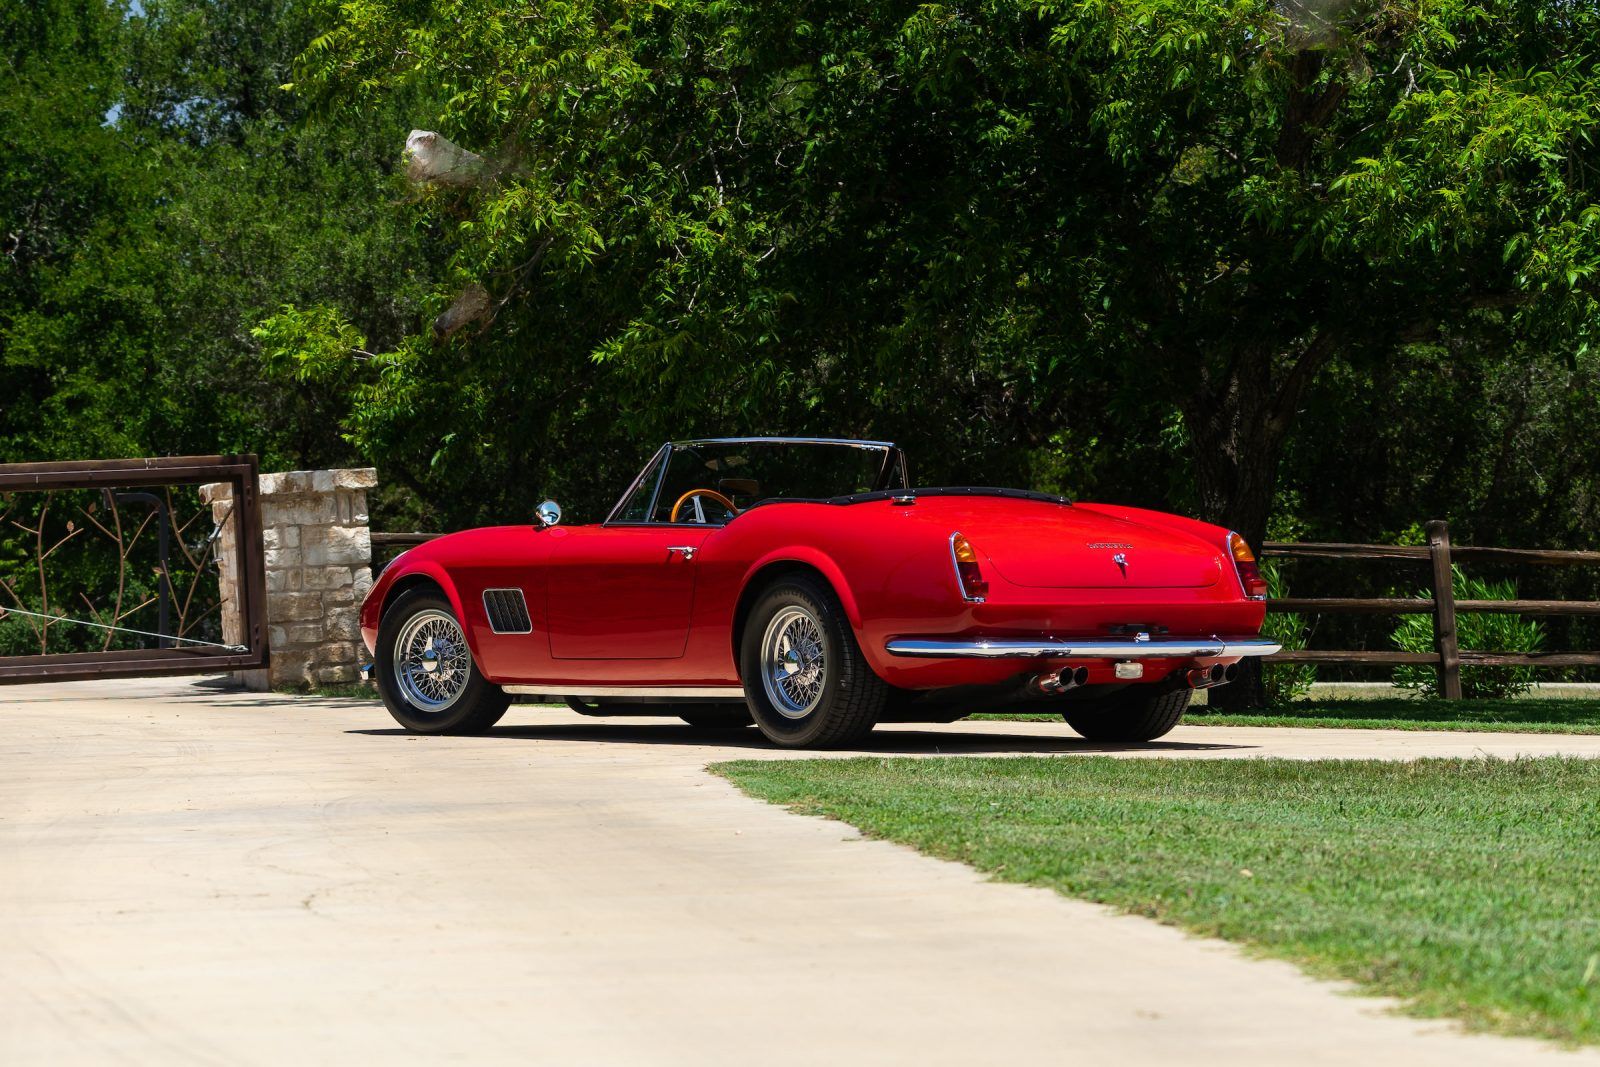 The back of a red Modena GT Spyder, the car used in the movie Ferris Bueller's Day Off.